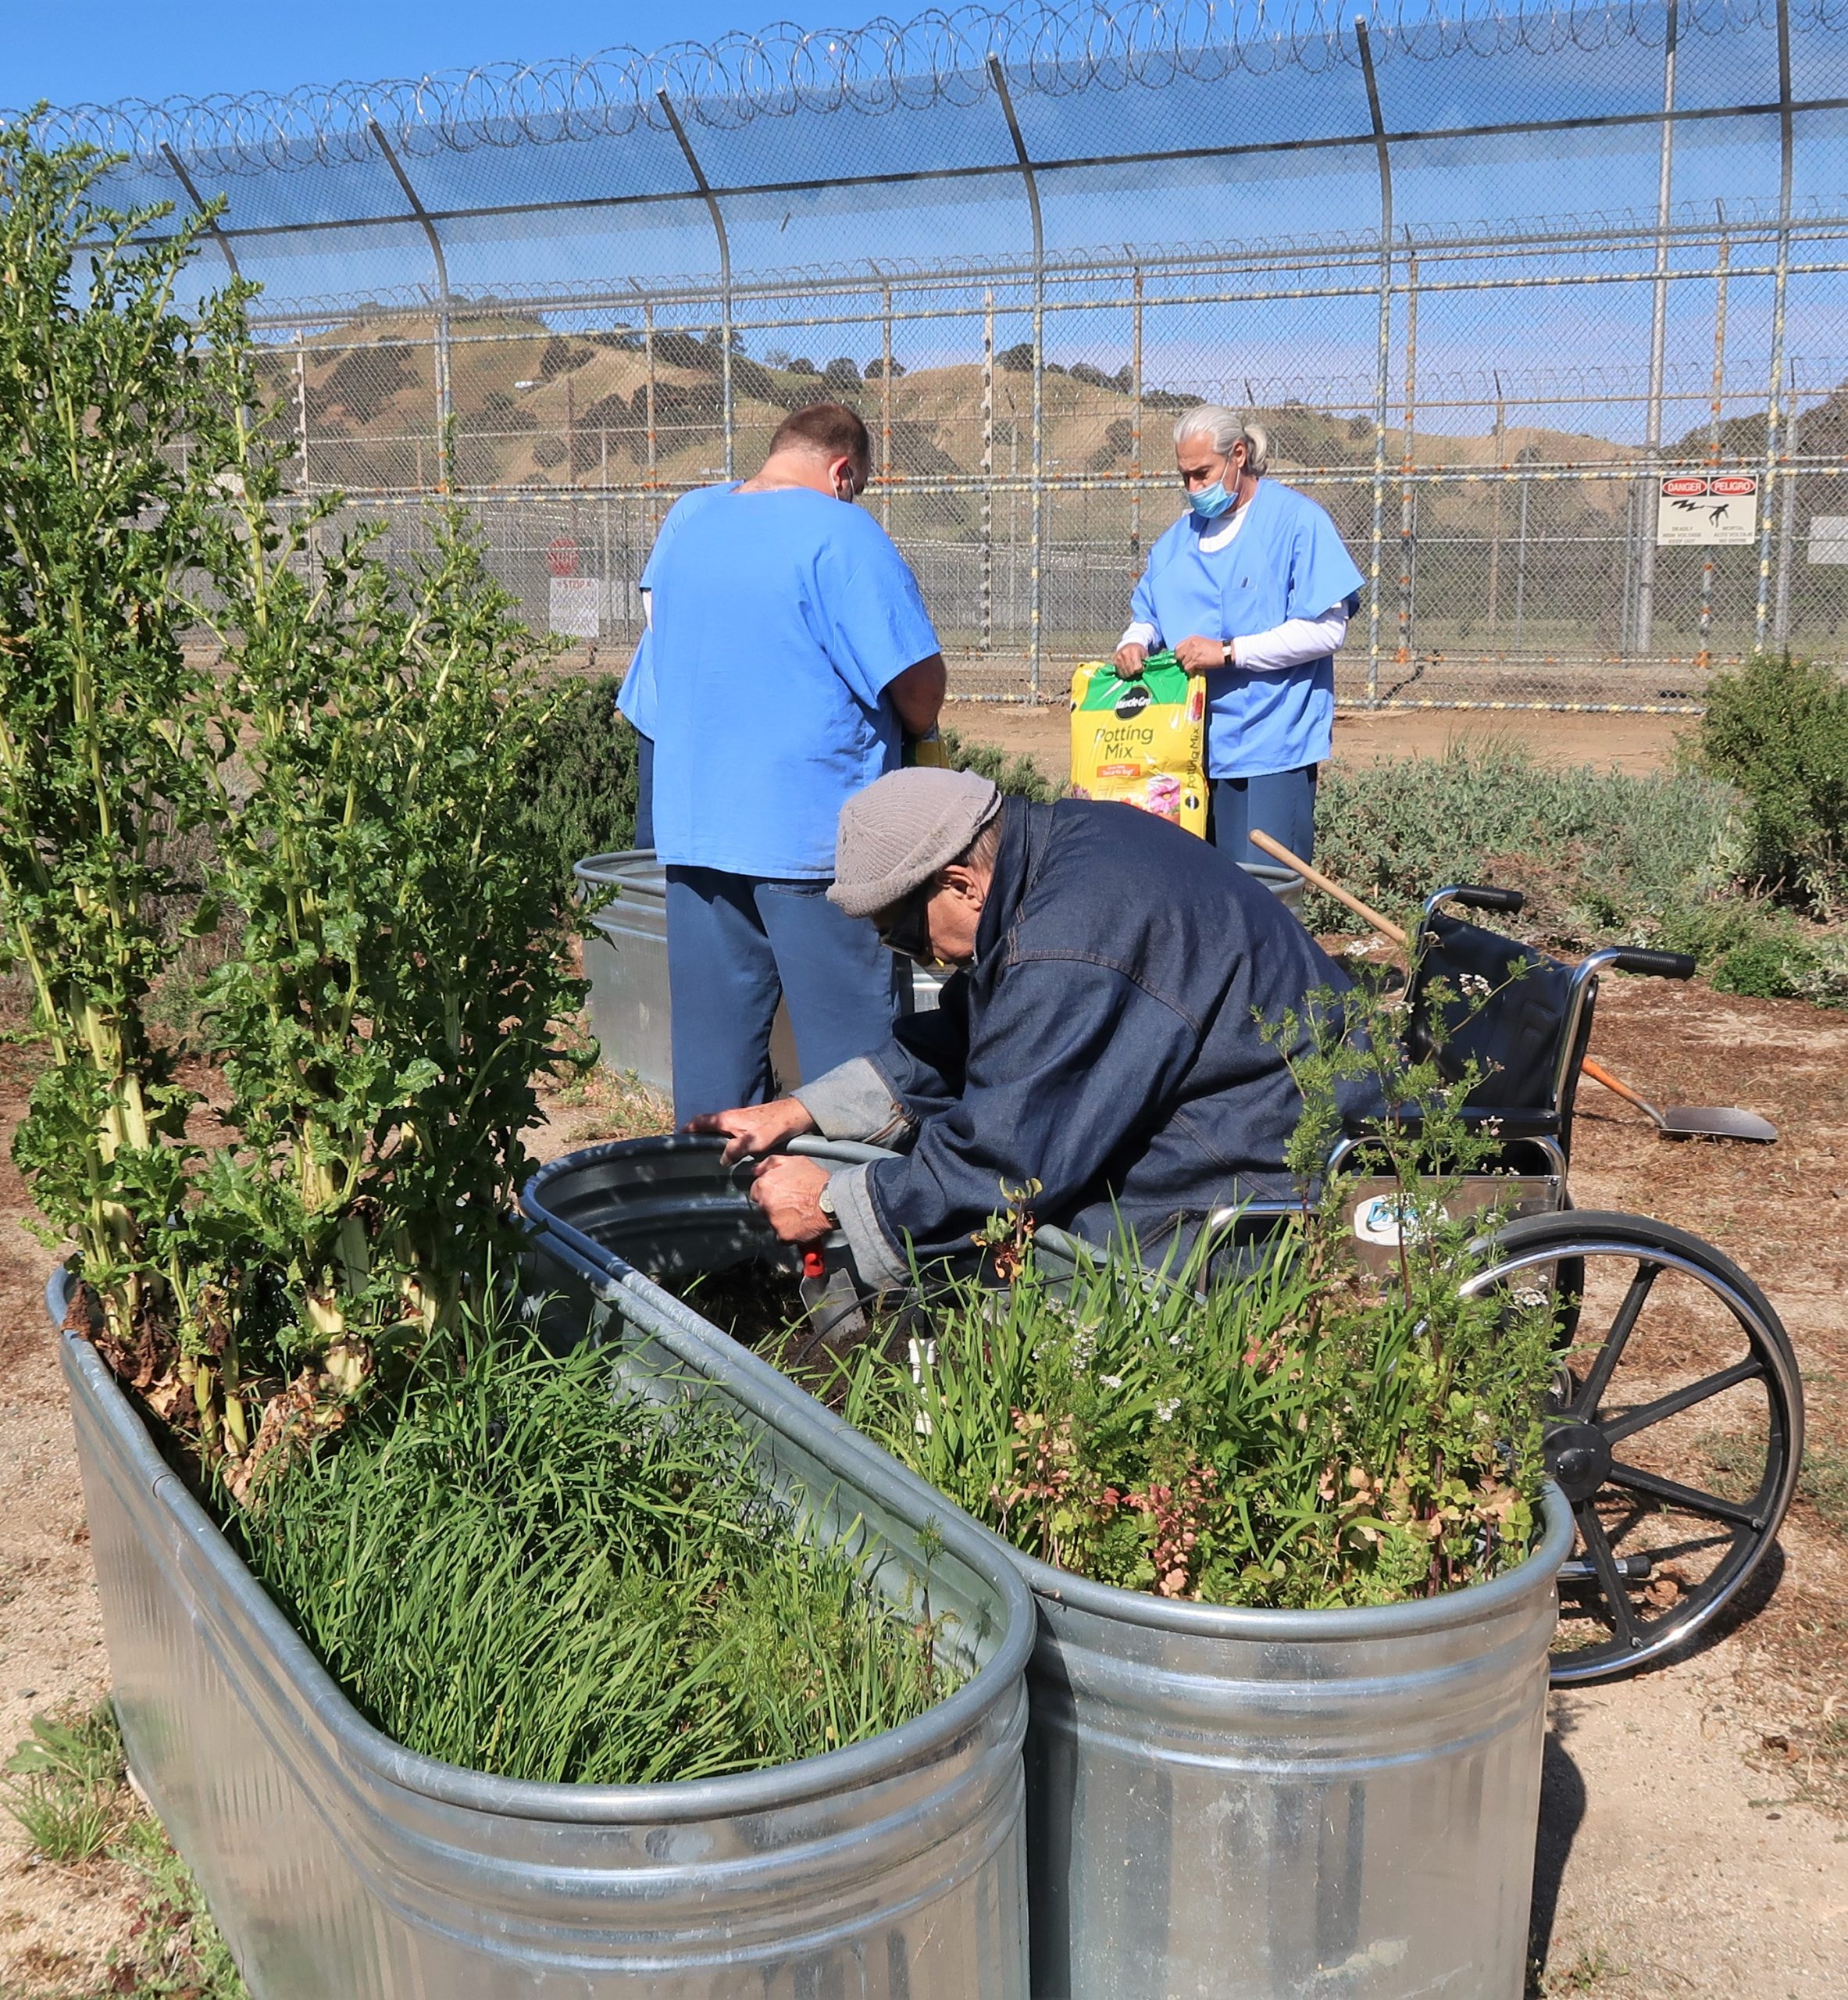 Man in wheelchair pulls weeds in a prison garden while others work in the background.